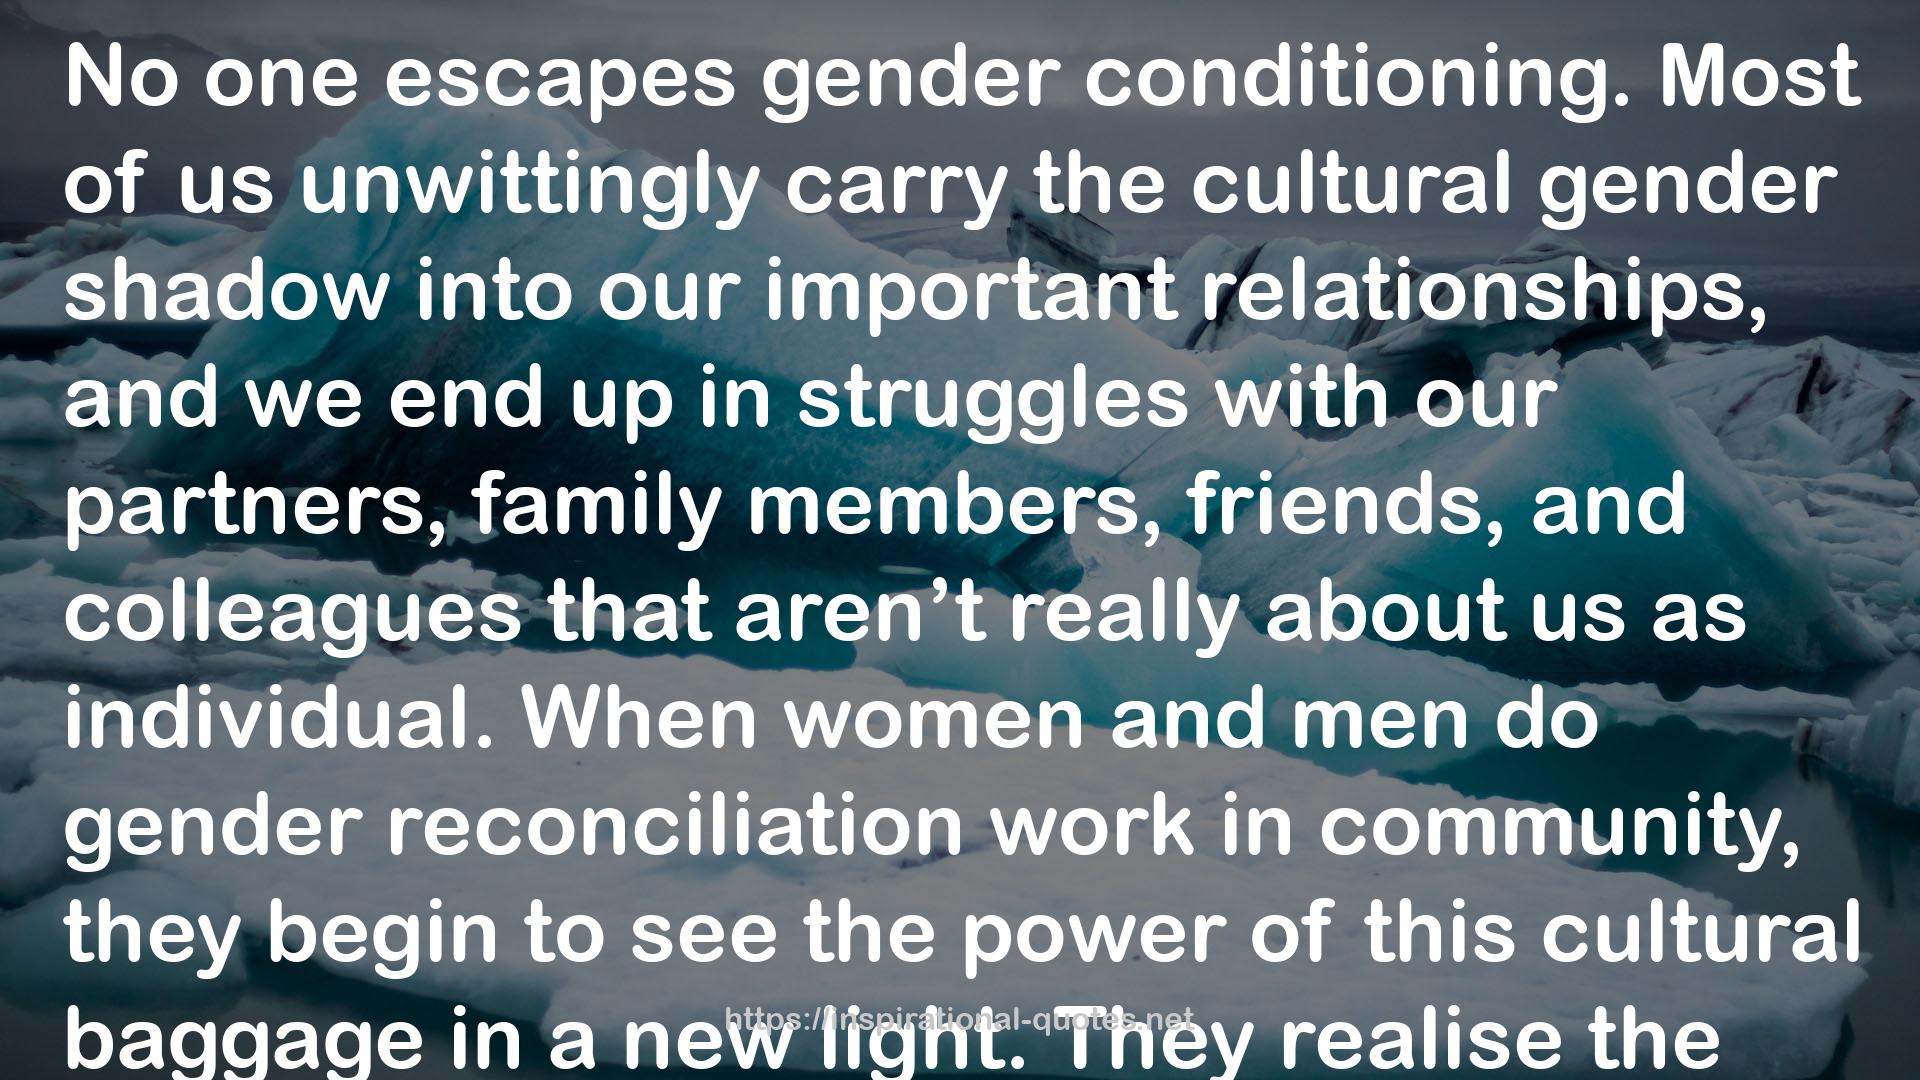 the cultural gender shadow  QUOTES